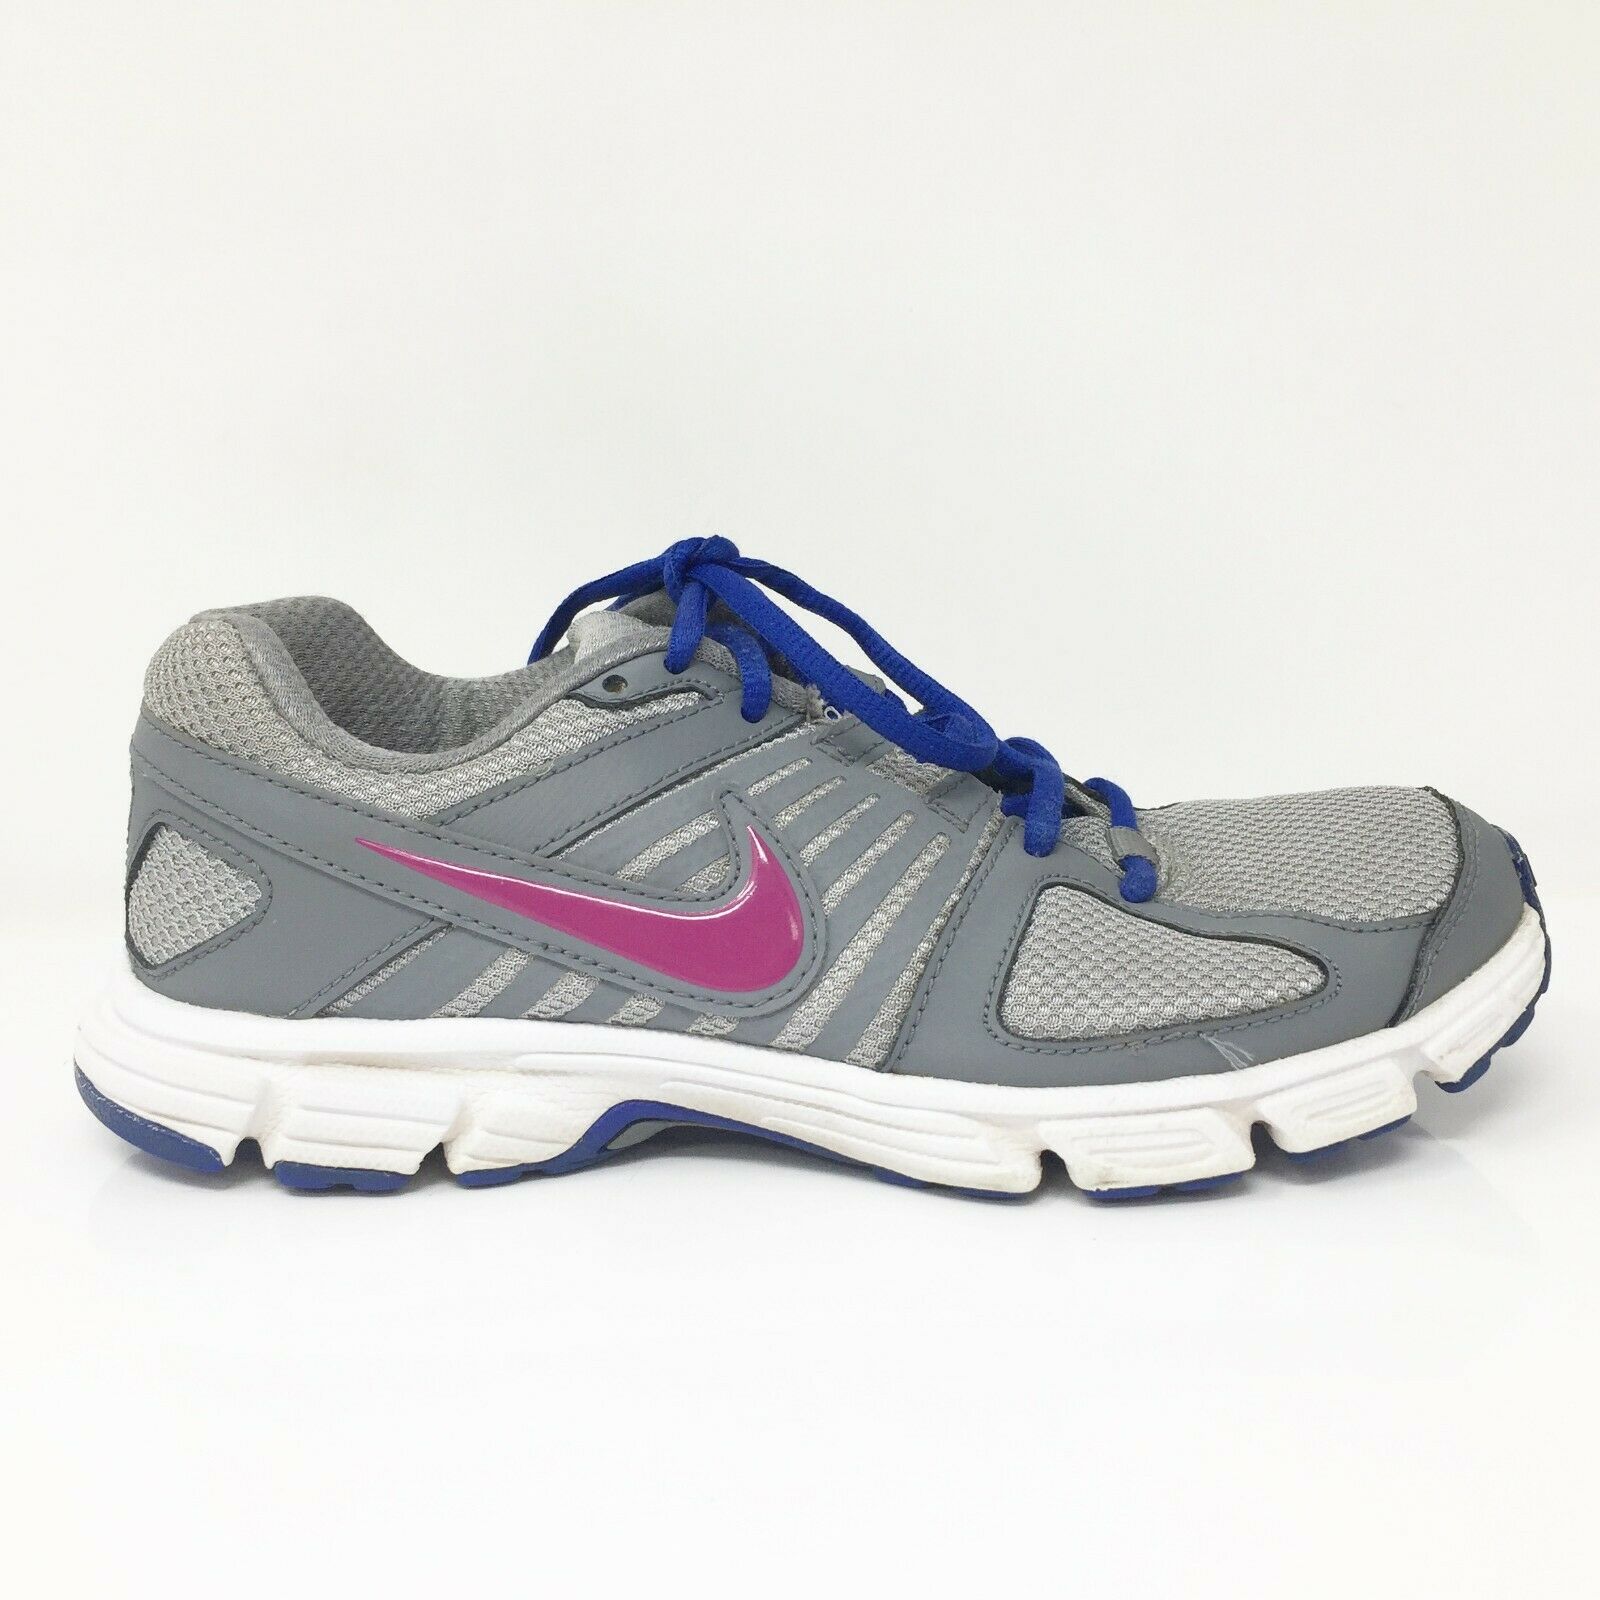 Nike Womens Downshifter 5 537571-008 Gray Pink Running Shoes Sneakers Size 6